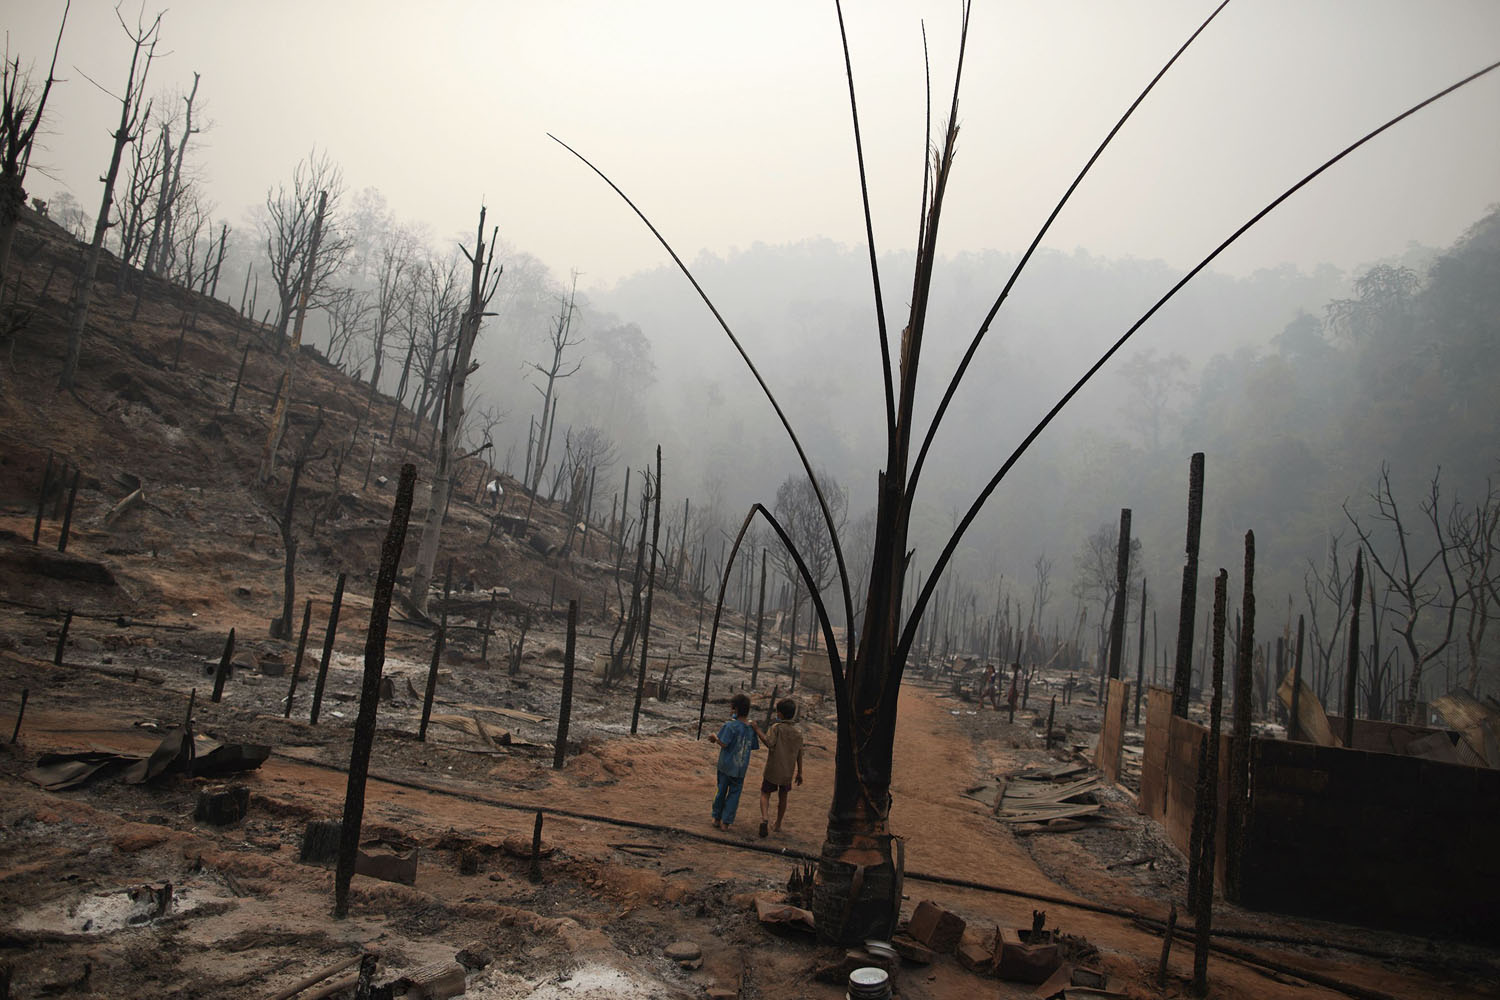 March 24, 2013. Two boys walk through the ruins of the Ban Mae Surin refugee camp near Mae Hong Son. At least 42 people have died in a fire at a camp which is home to thousands of refugees from Myanmar near the Thai-Myanmar border.